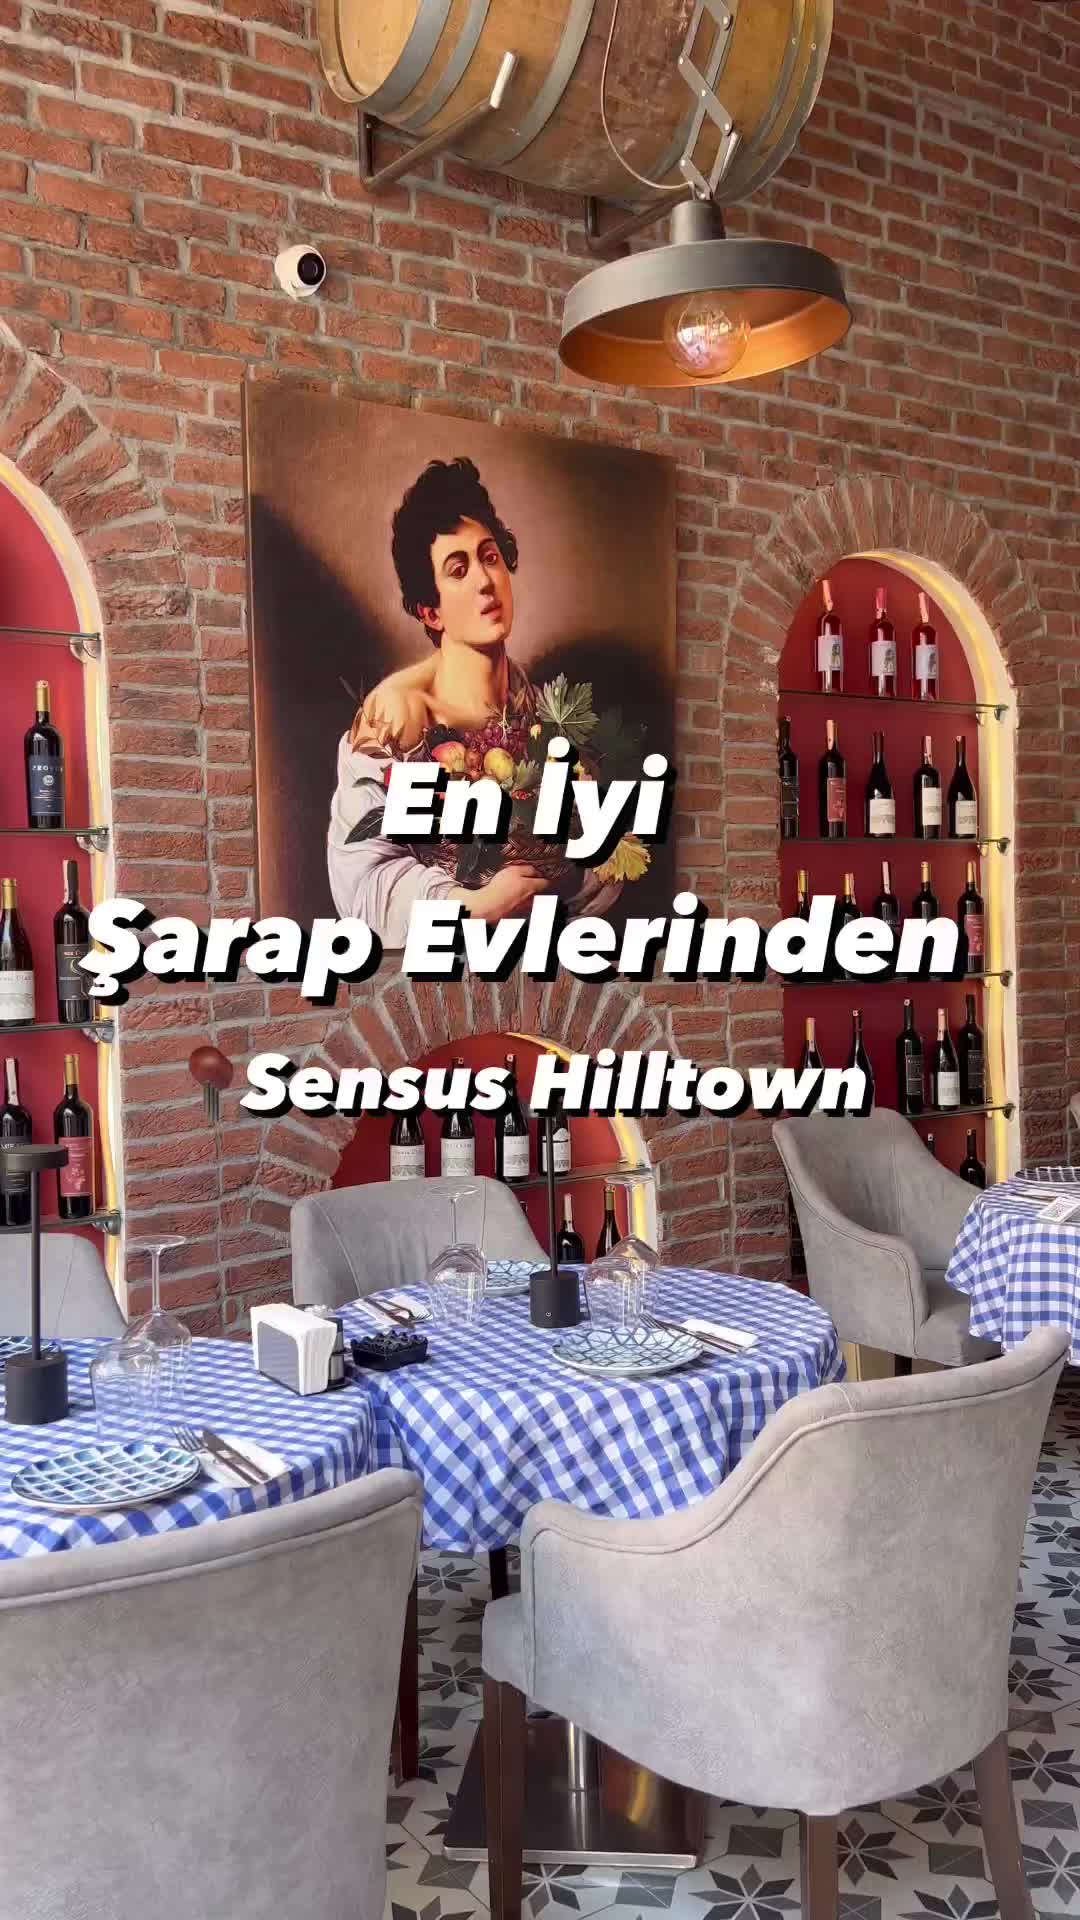 Discover Delicious Dishes at Sensus Hilltown Restaurant